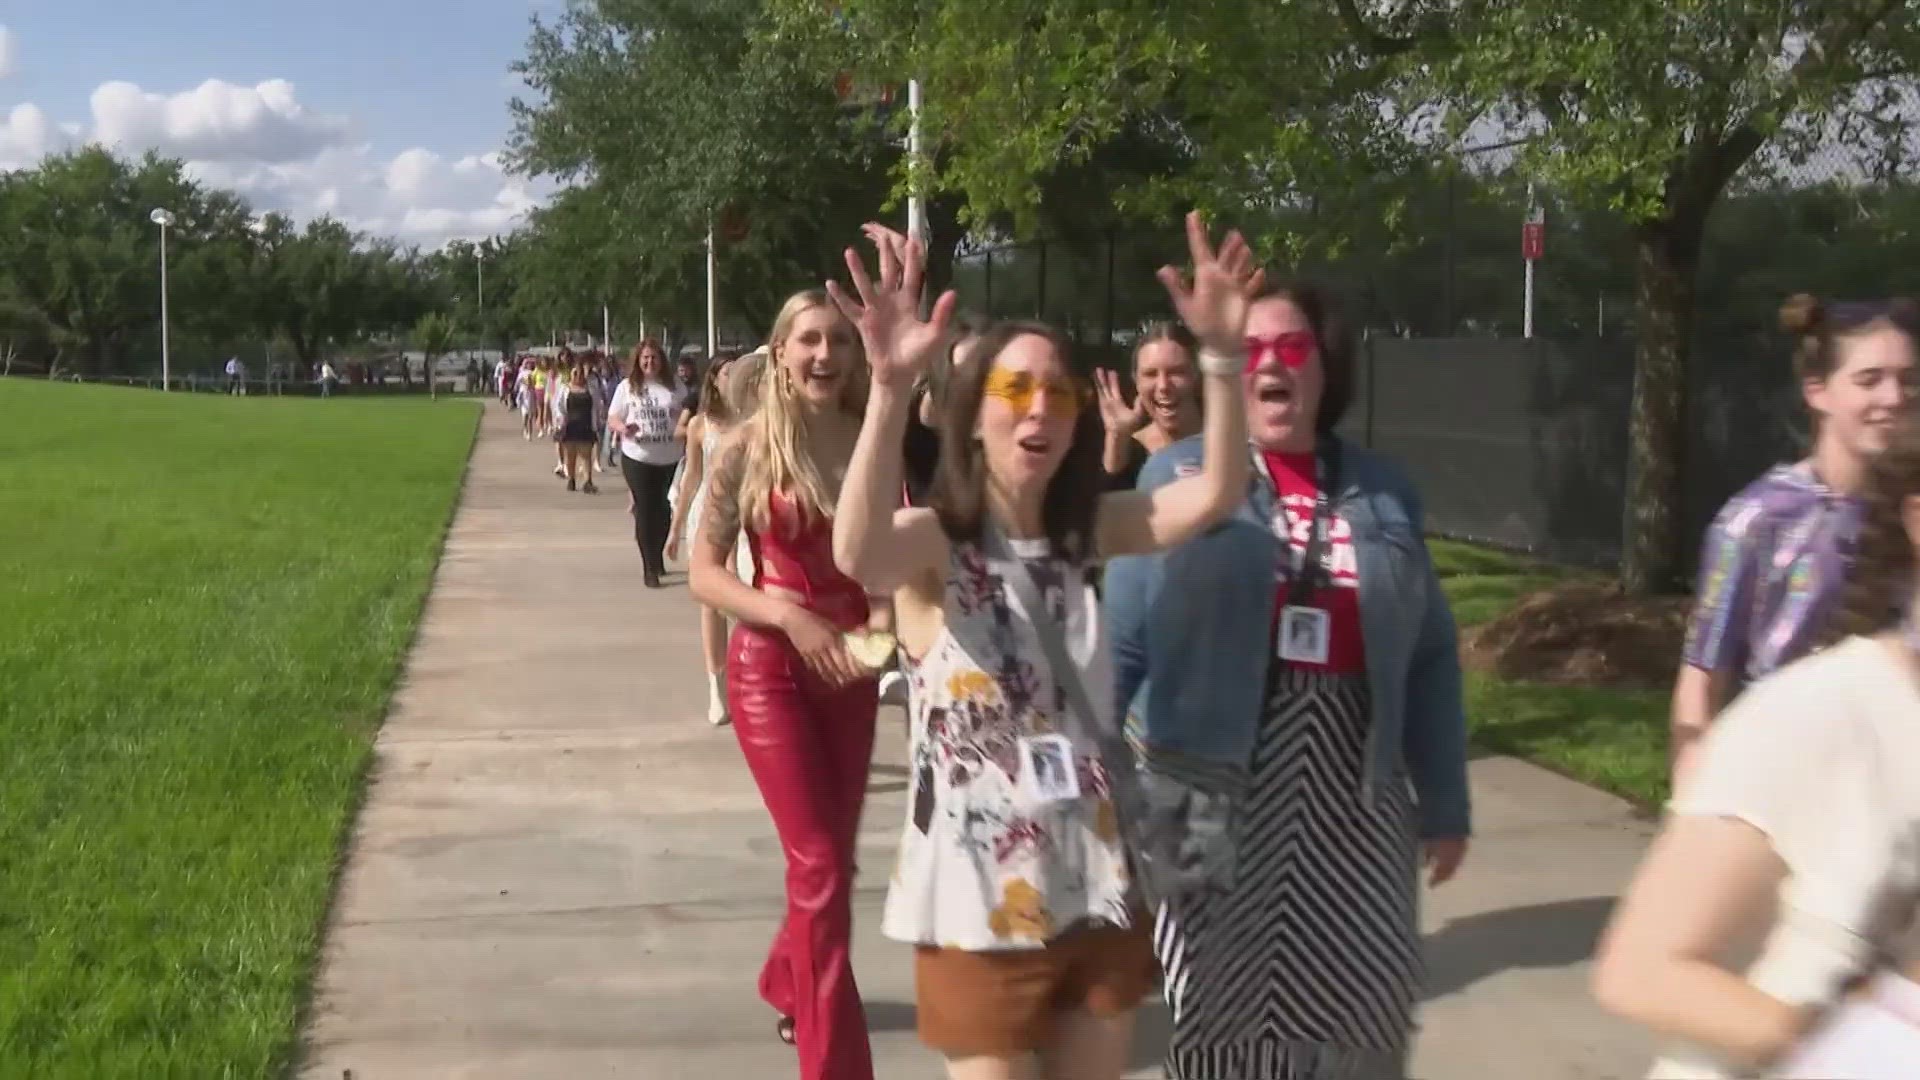 Thousands of fans line up for Houston Taylor Swift merch